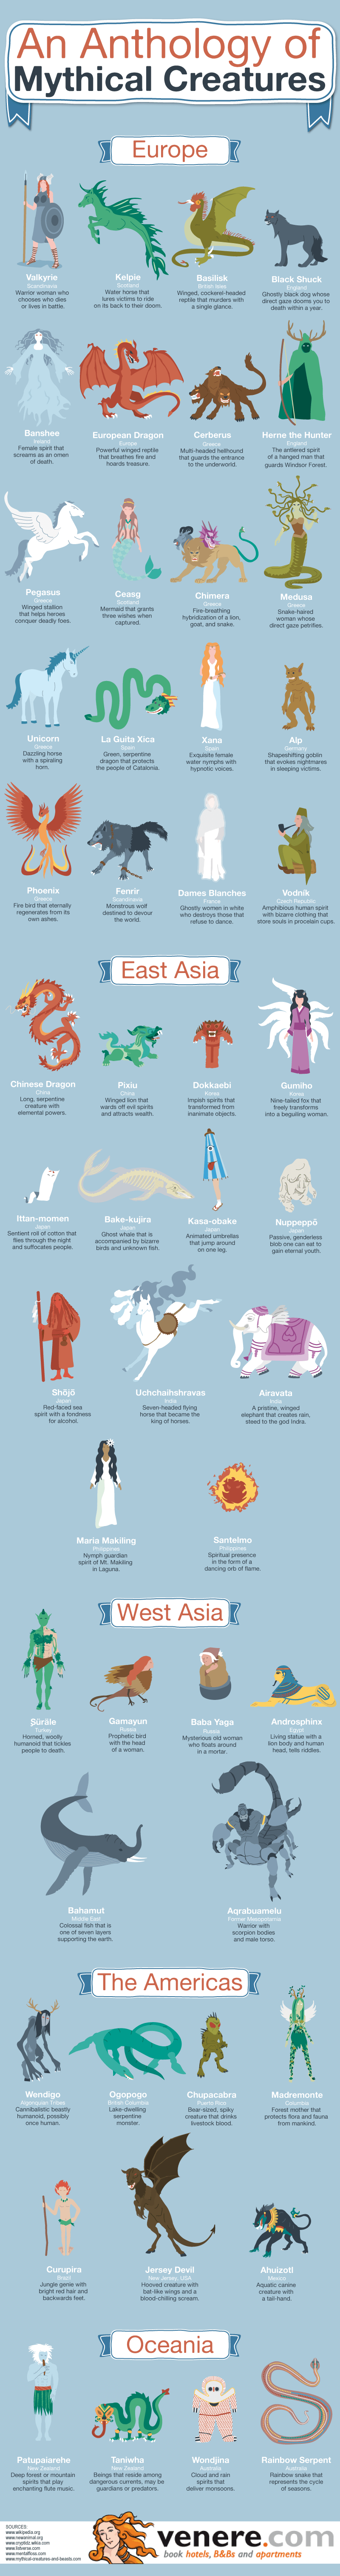 An Anthology of Mythical Creatures - Infographic